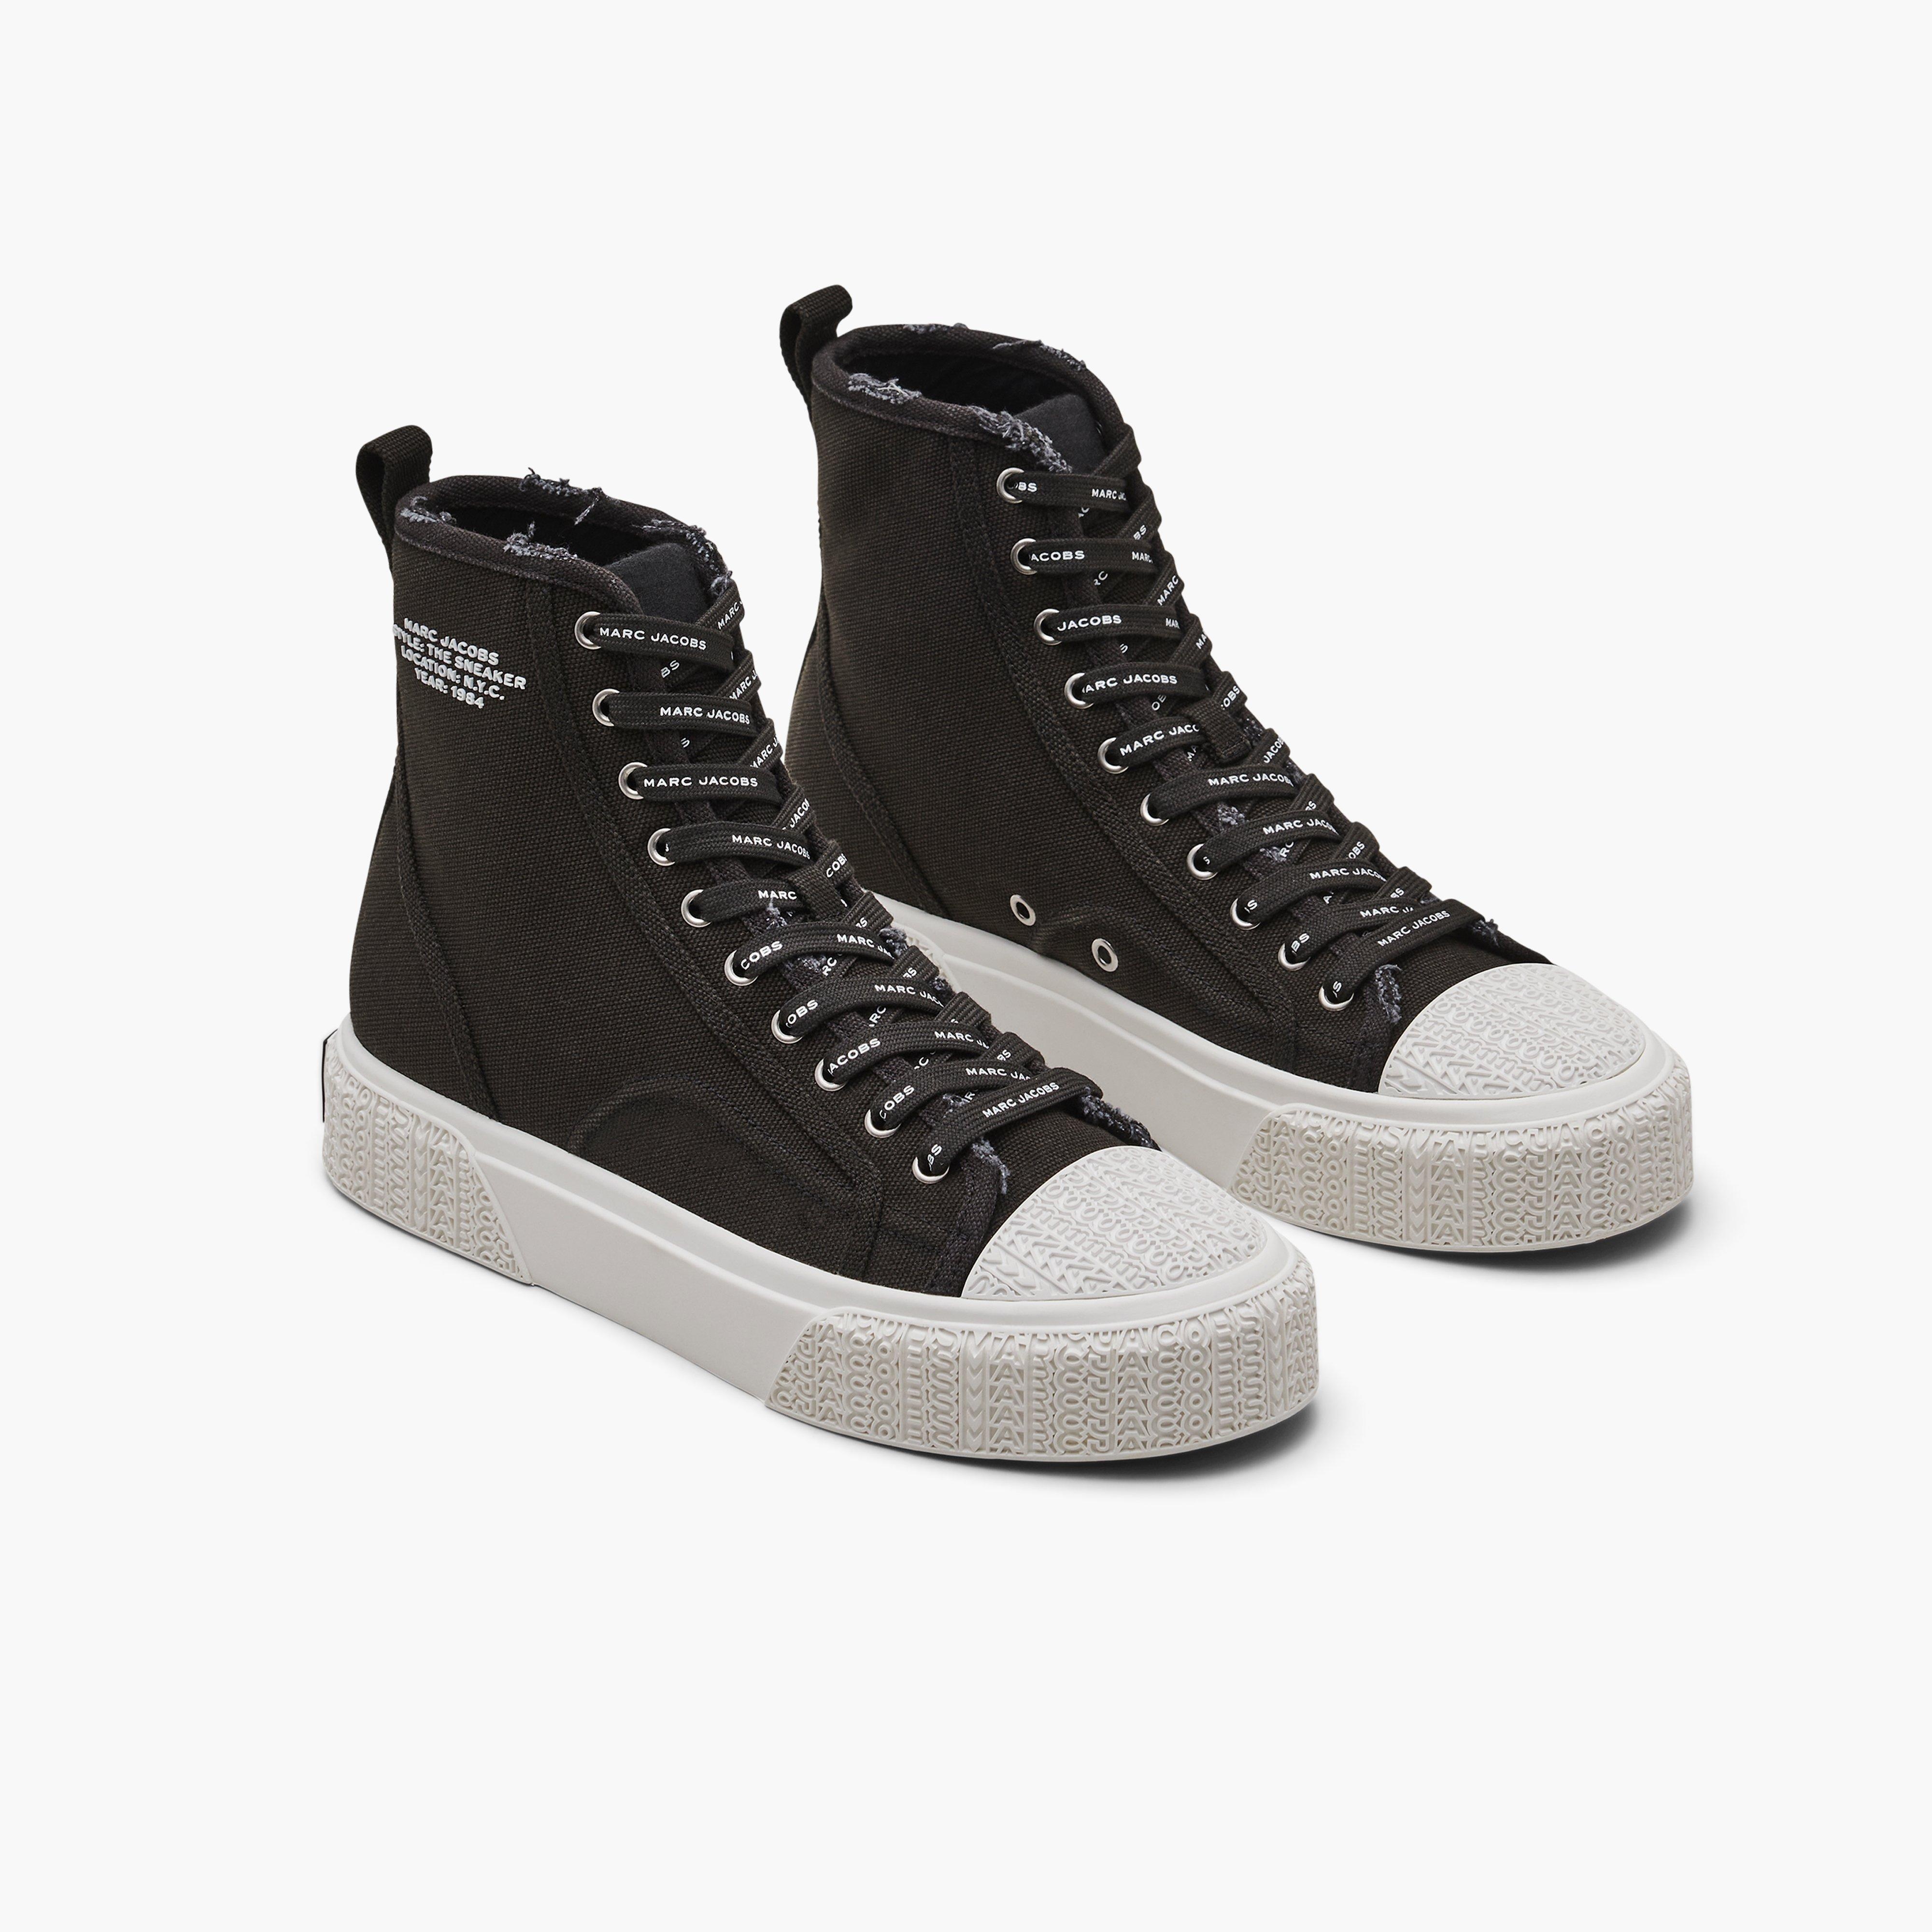 THE HIGH TOP SNEAKER - 1